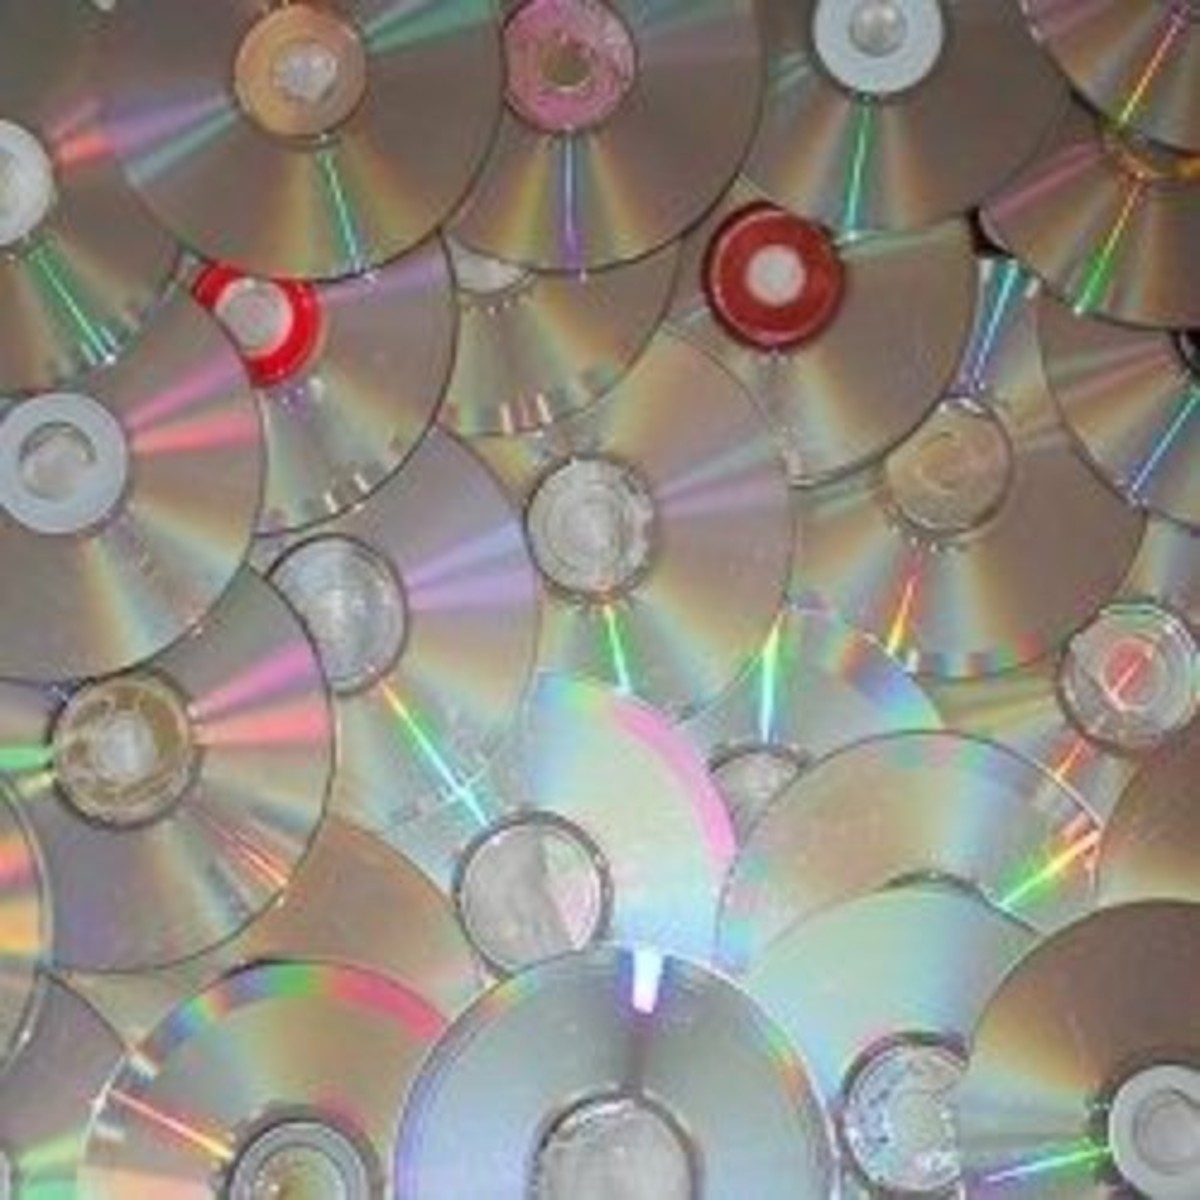 Ways to Reuse CDs in Crafts